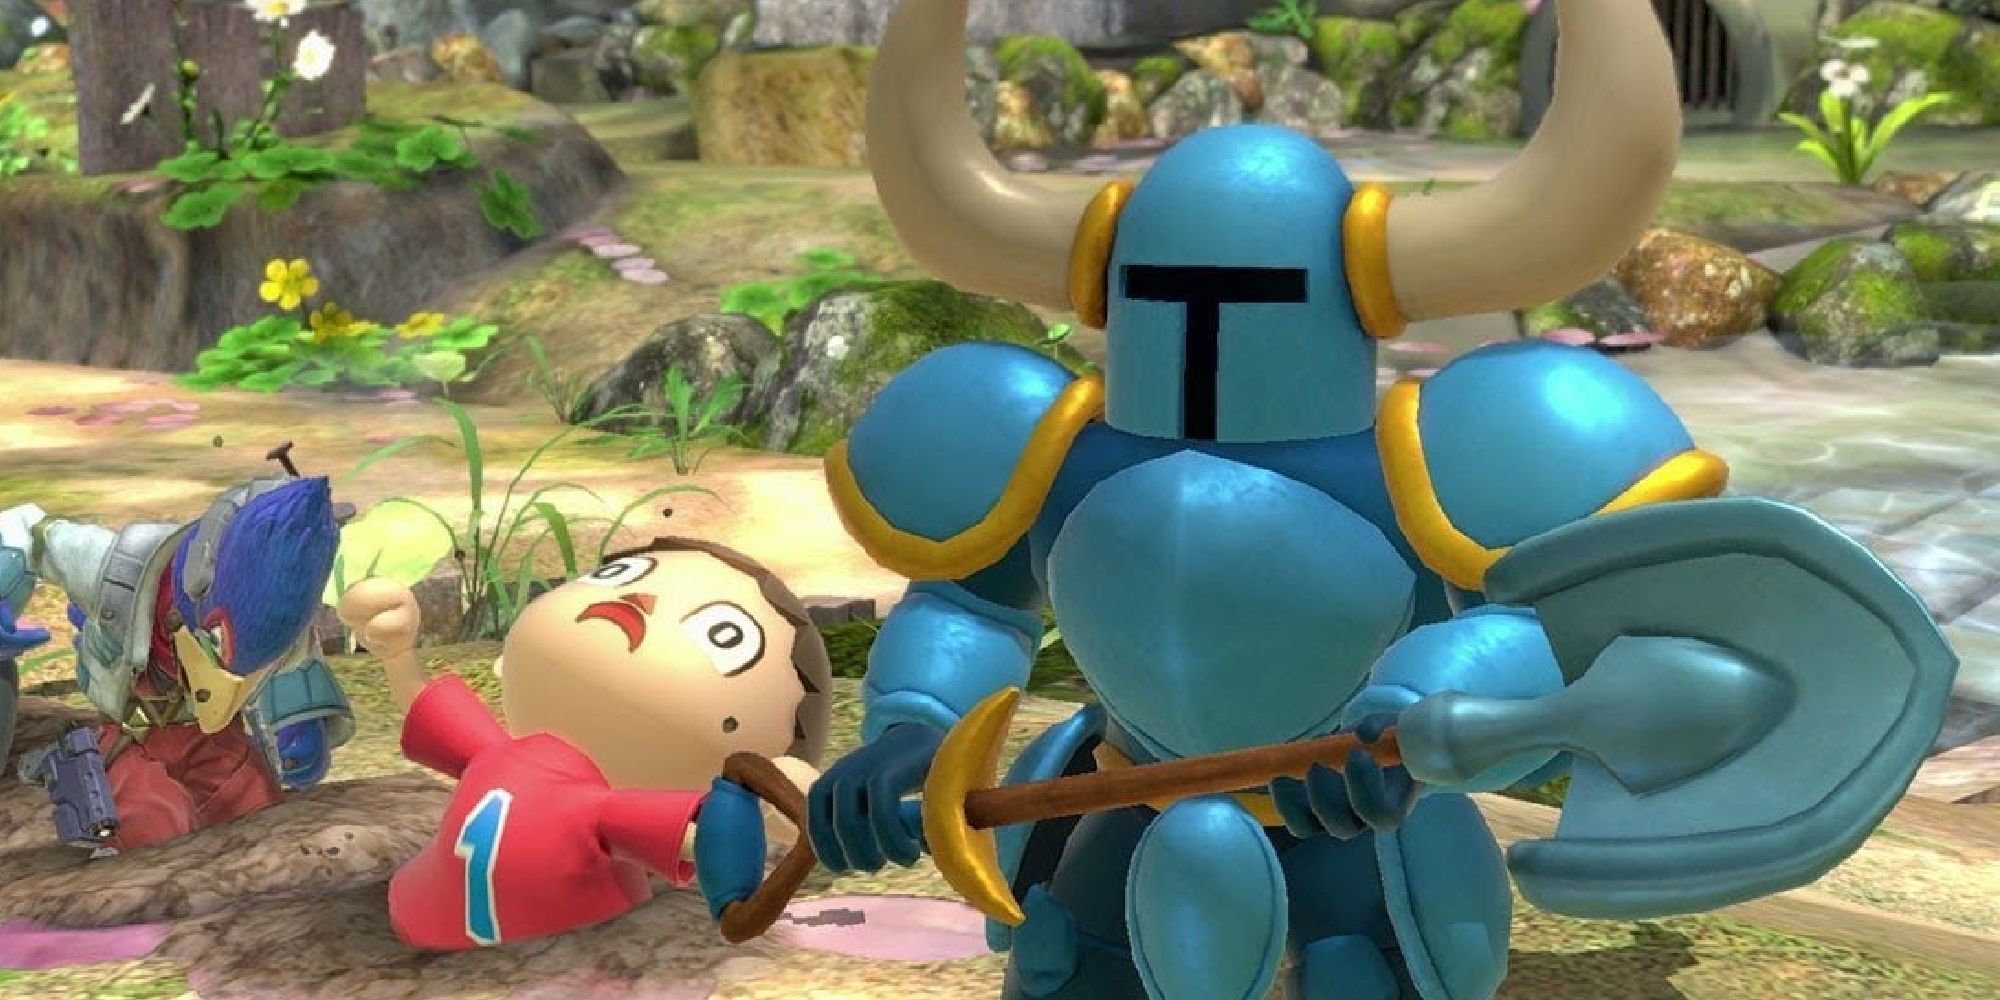 Shovel Knight after burying Falco and Villager in Smash Ultimate